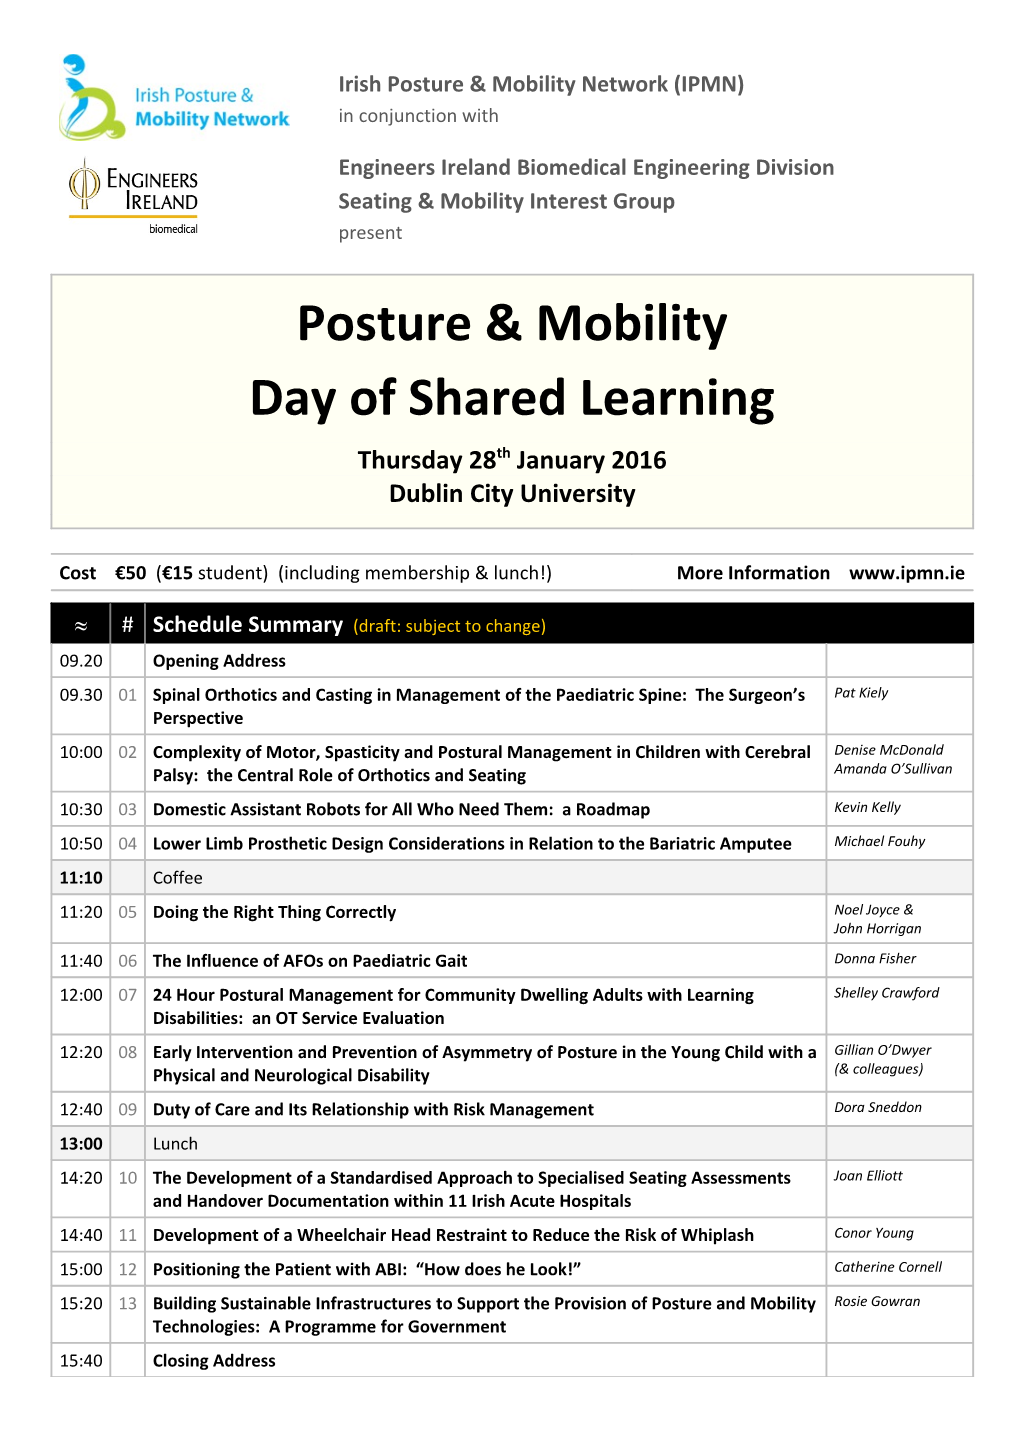 IPMN Day of Shared Learning